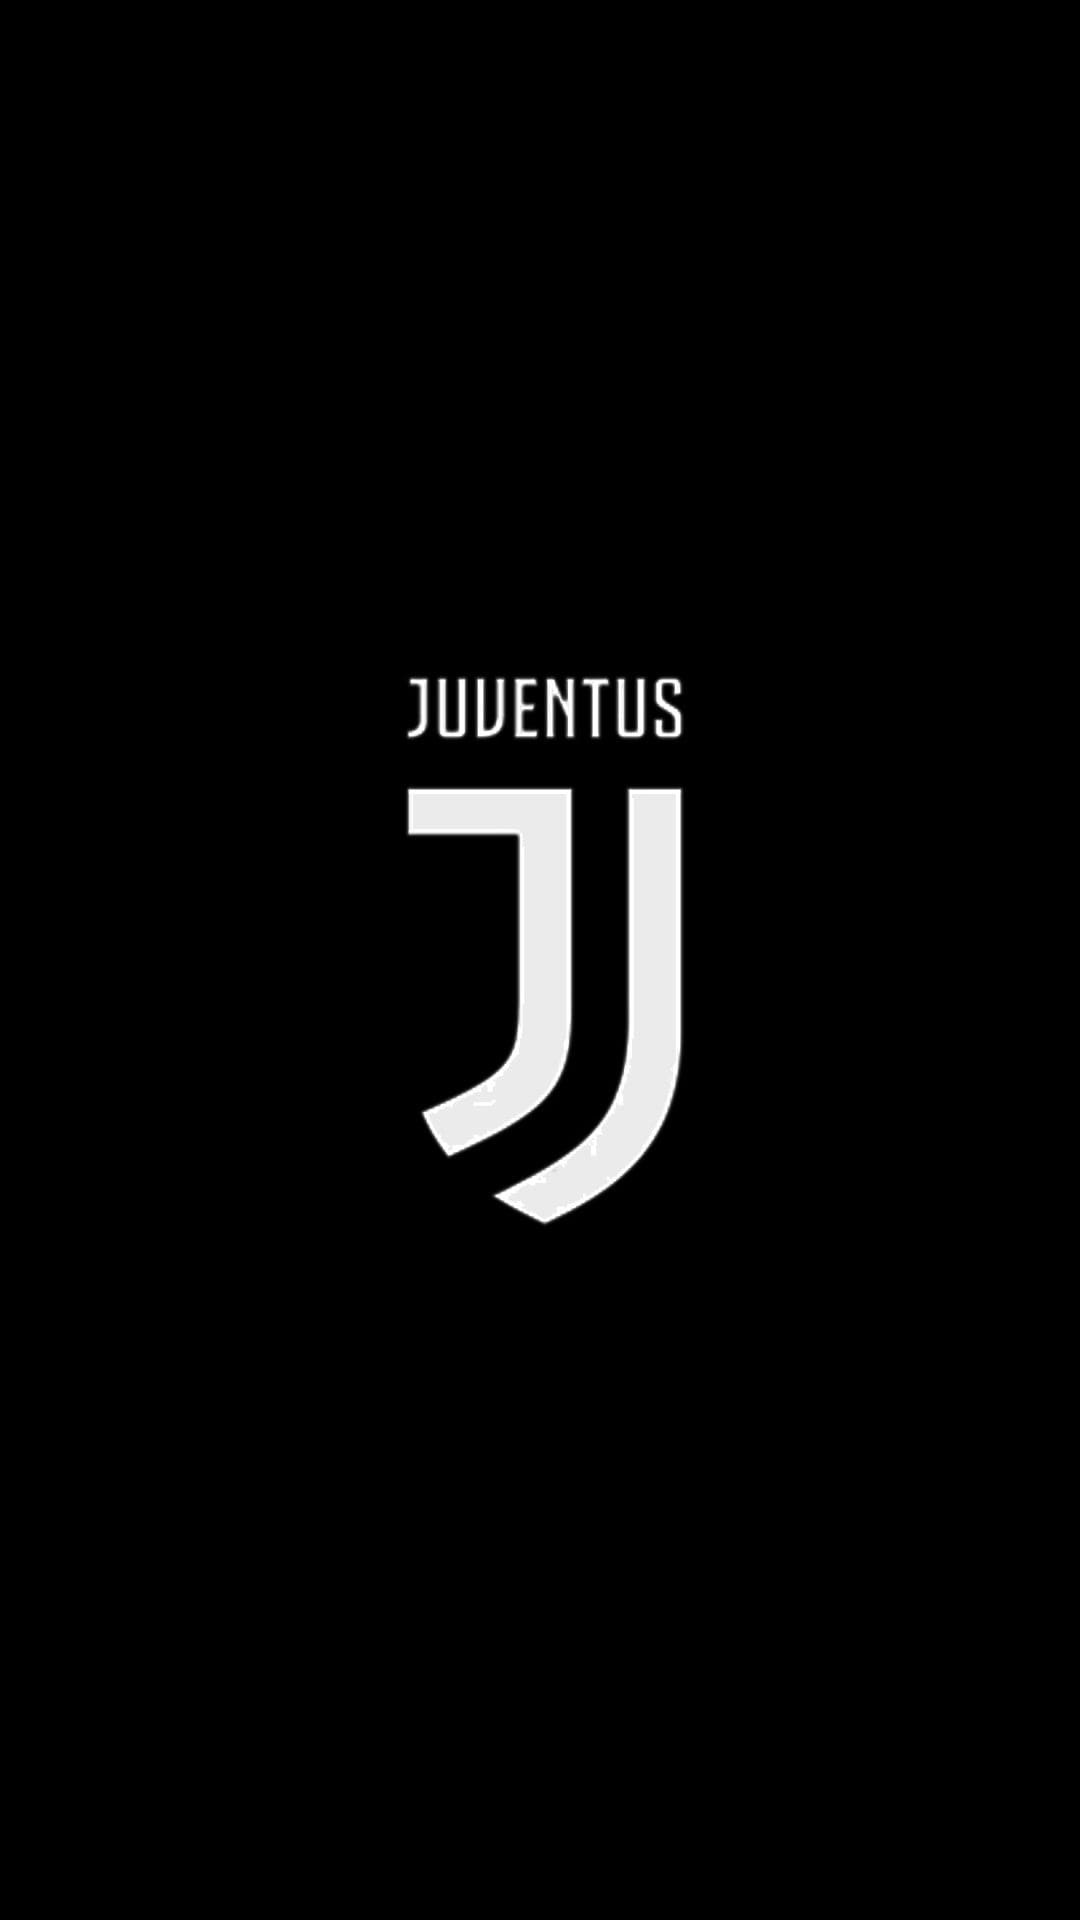 Juventus: I Bianconeri, Ranked second-best club in Europe during the 20th century. 1080x1920 Full HD Wallpaper.